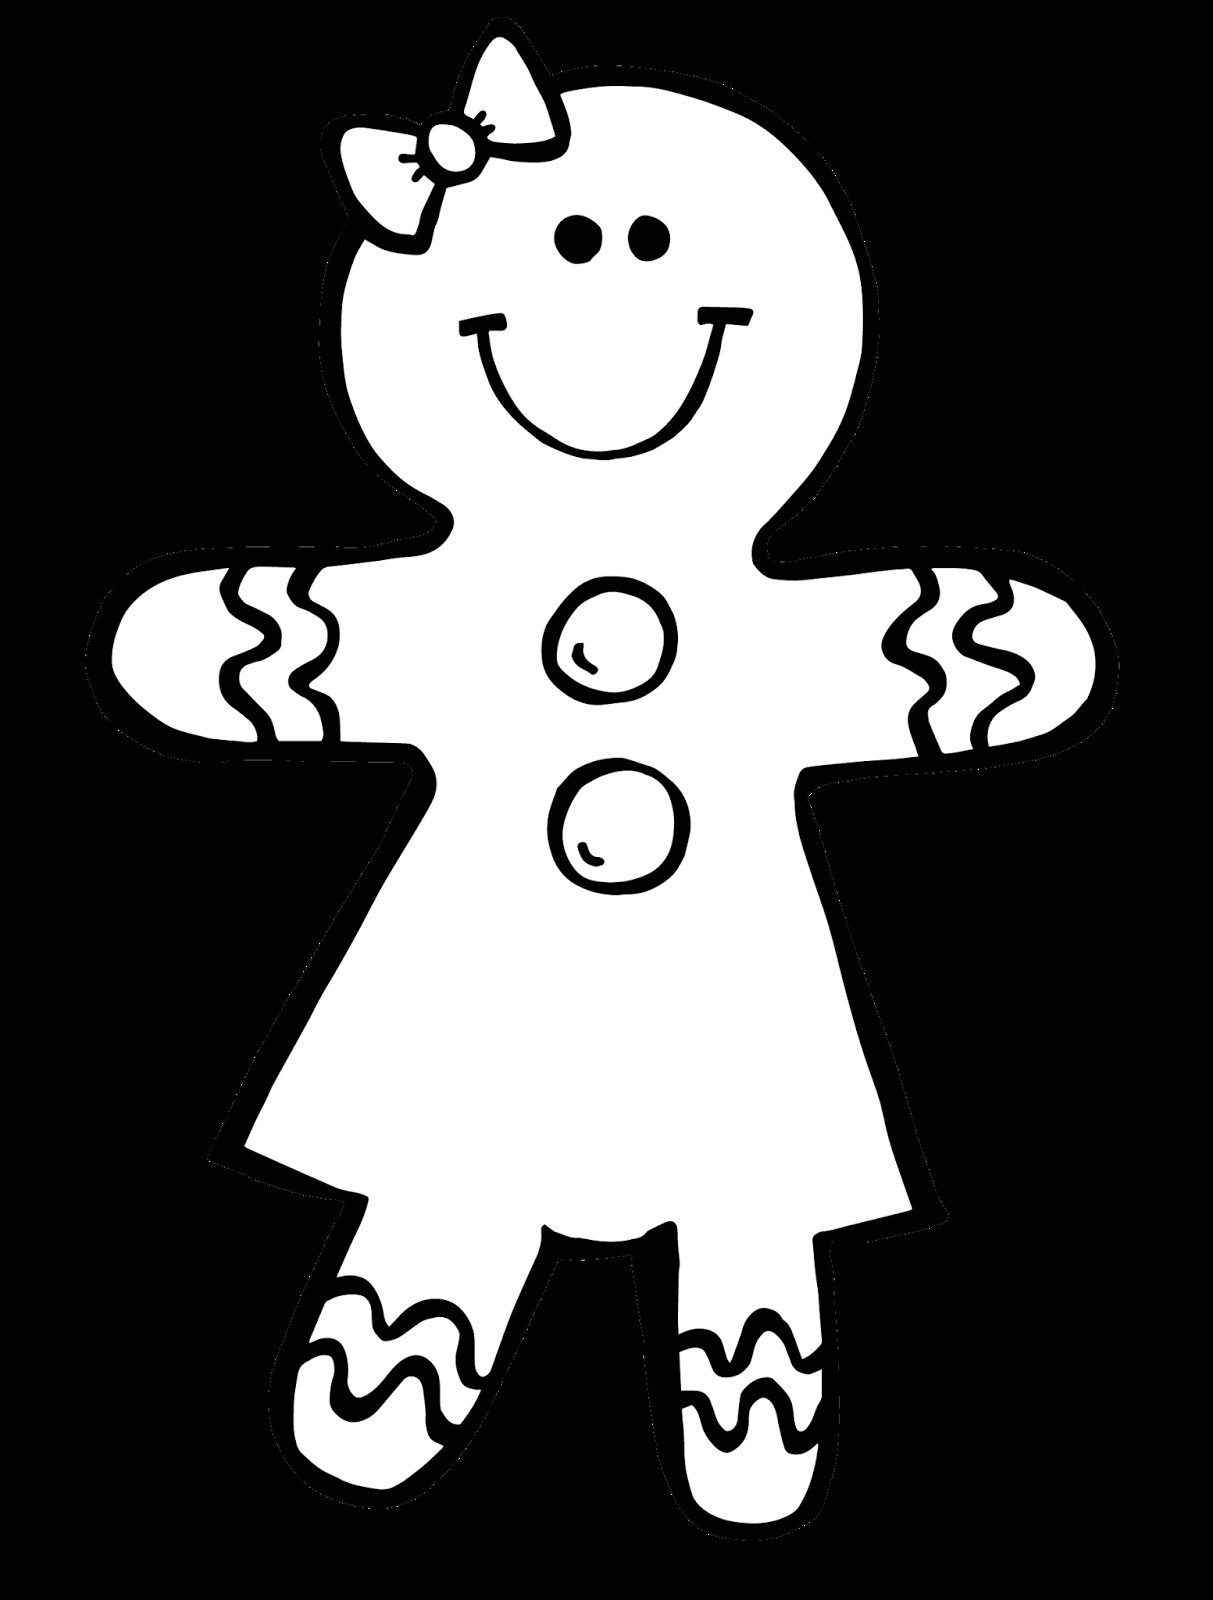 Gingerbread Boy And Girl Coloring Pages
 The Art of Teaching in Today s World Gingerbread Boy